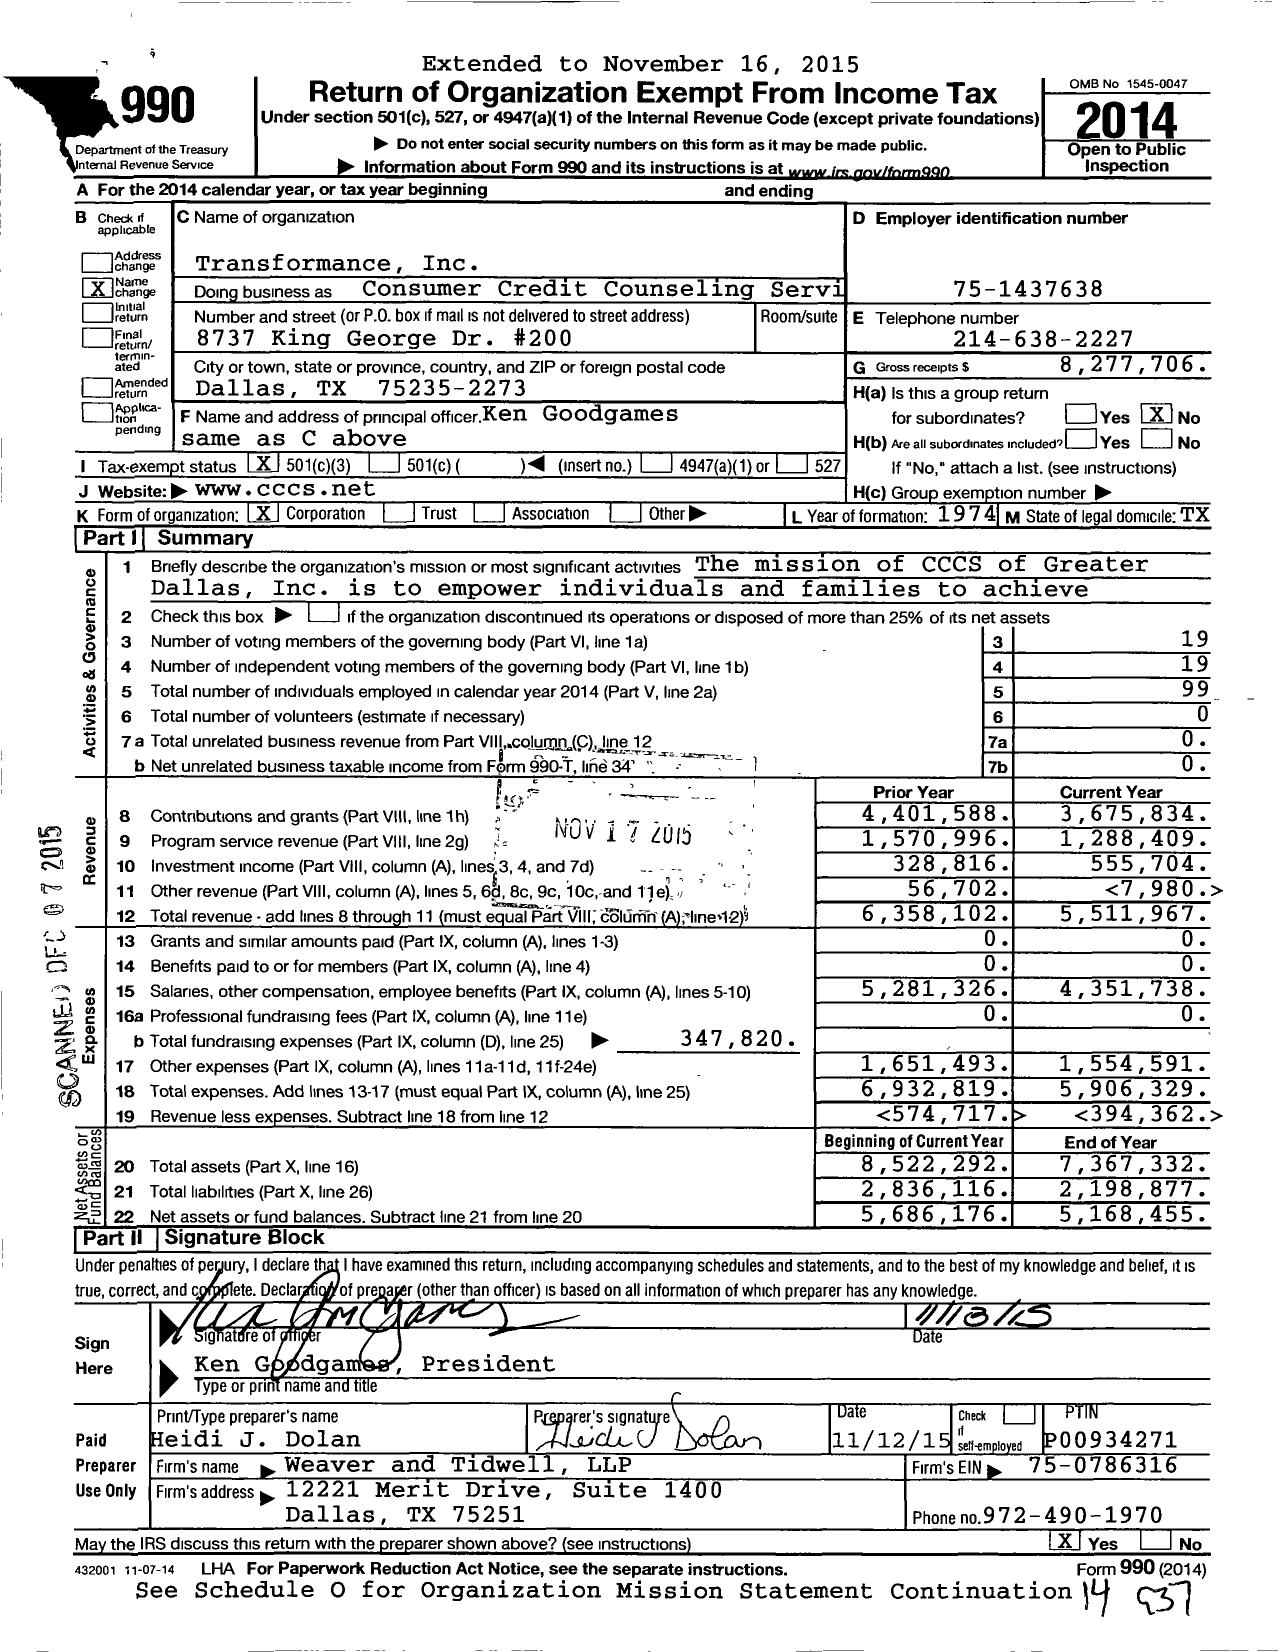 Image of first page of 2014 Form 990 for Transformance